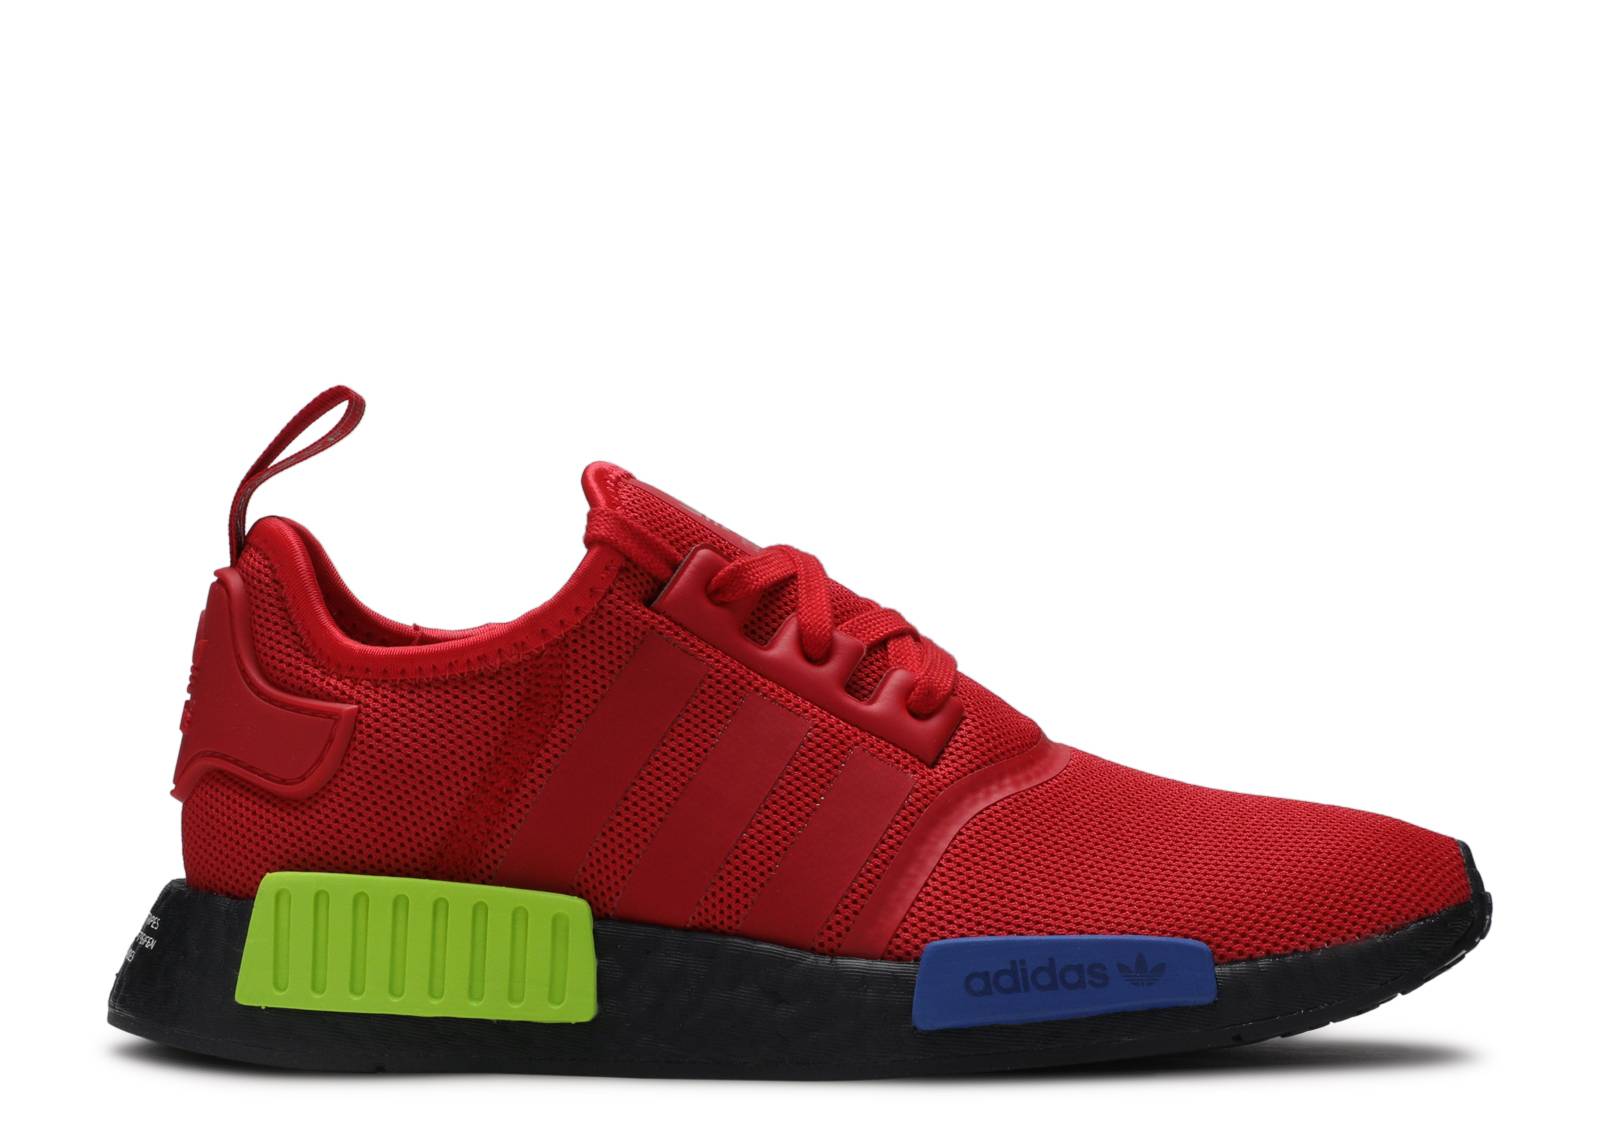 NMD_R1 'Red Multi-Color'